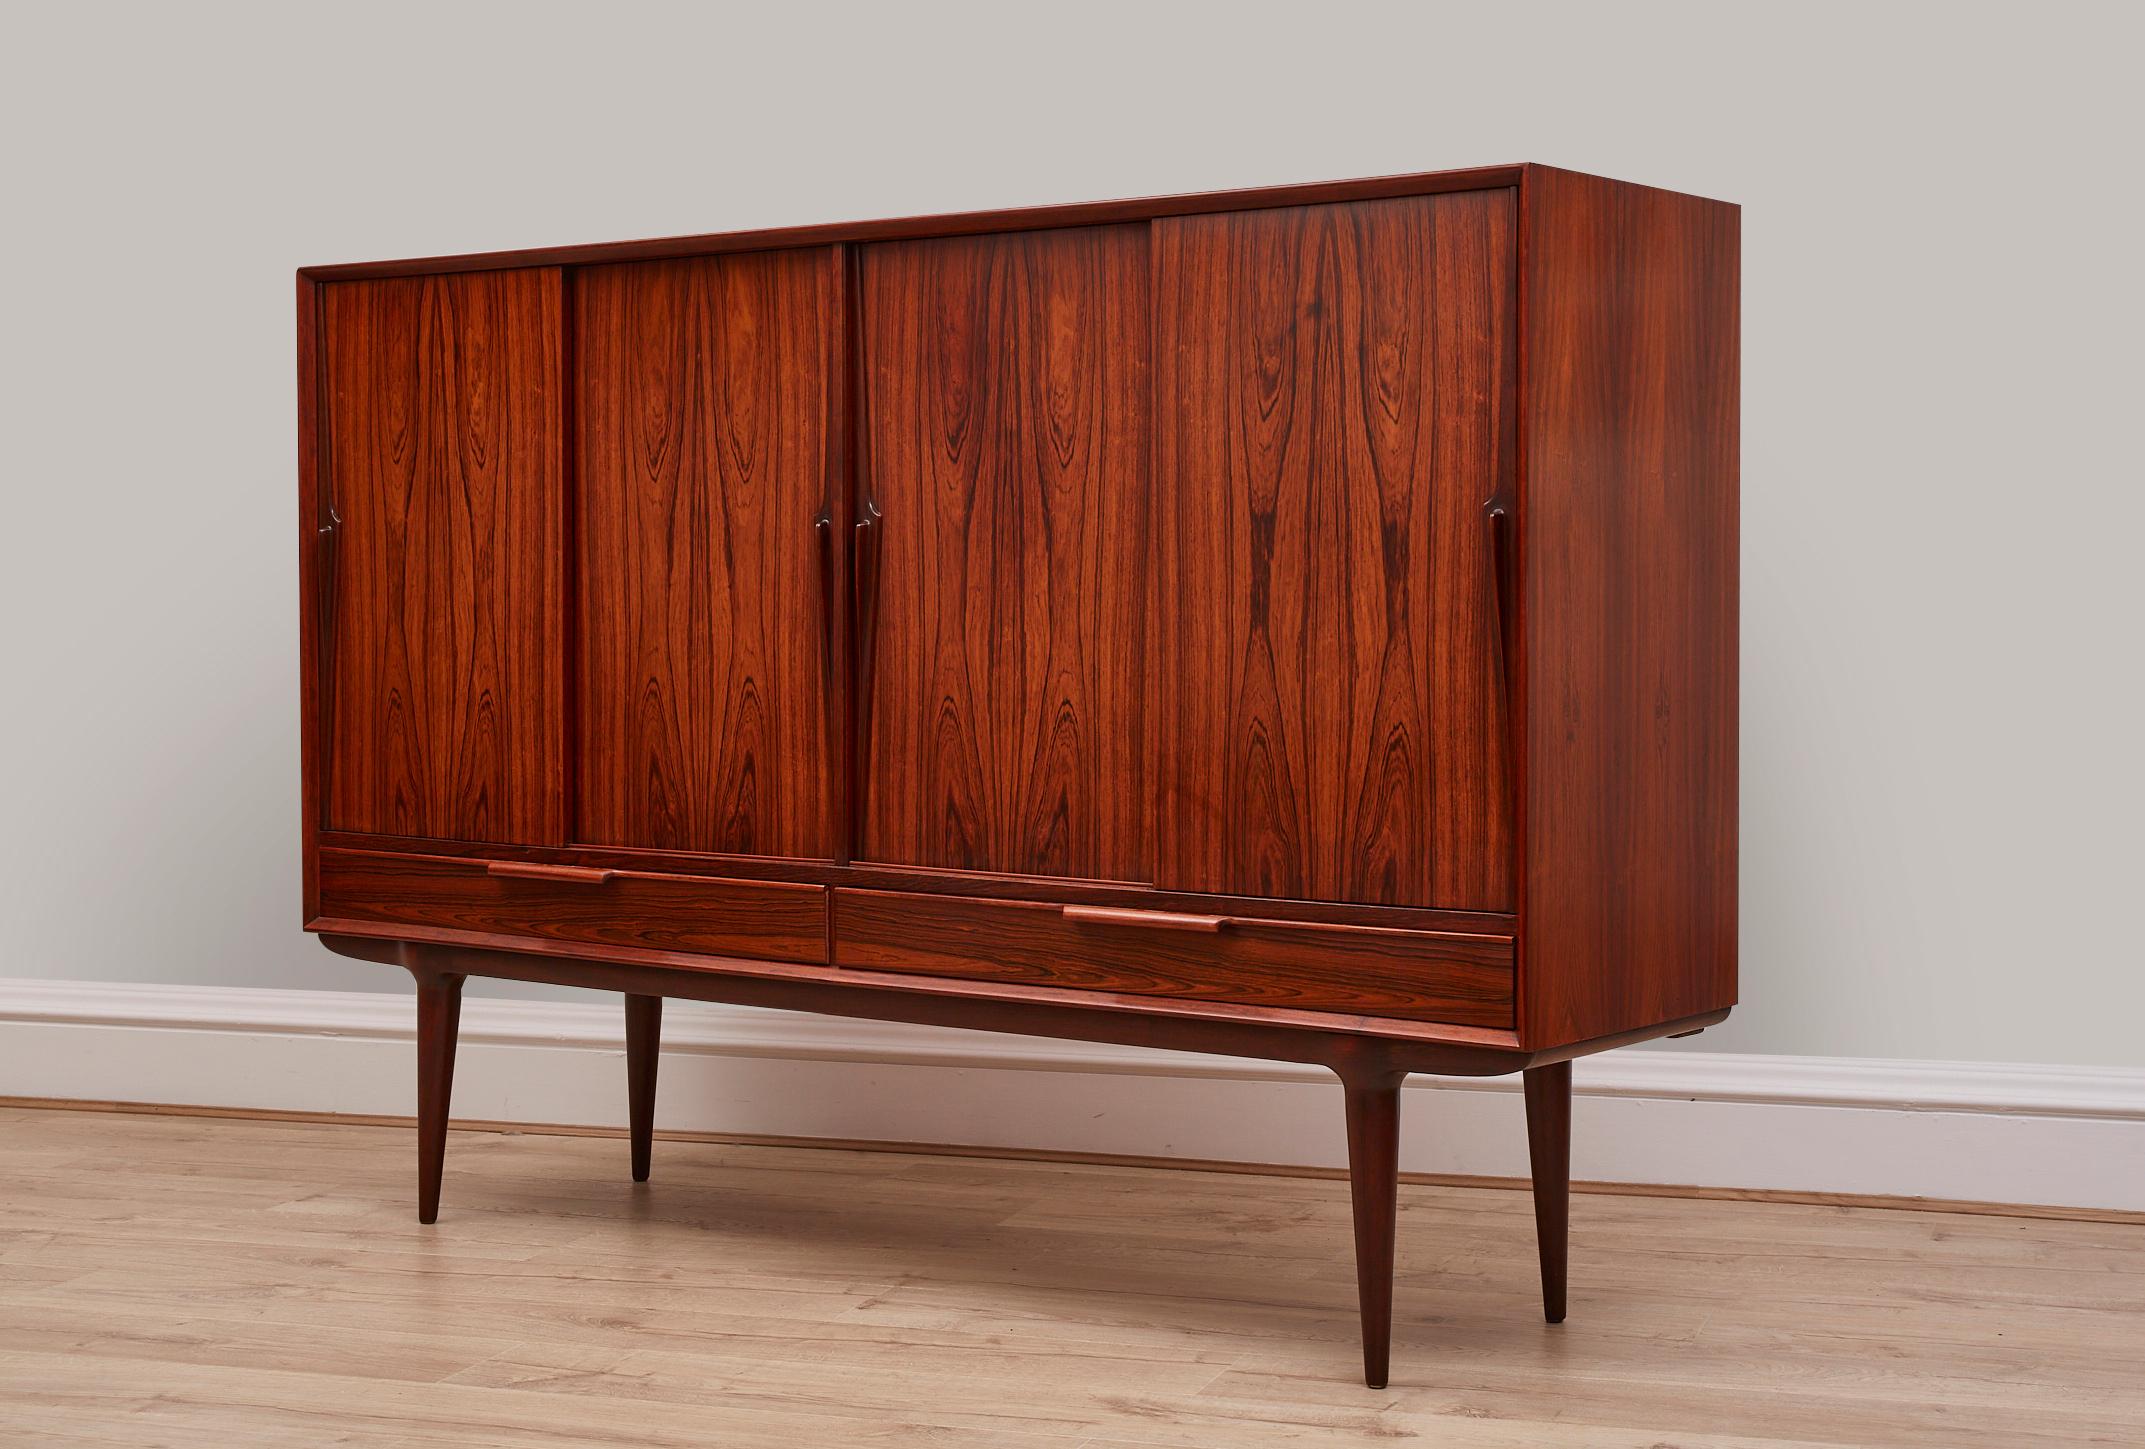 Extremely beautiful Danish sideboard in rosewood, this was designed by Gunni Omann for Axel Christensen. It was made in Denmark from the 1960's
 
In amazing condition for its age and has been re-polished, so looks brand new.

Gunni Omann began his